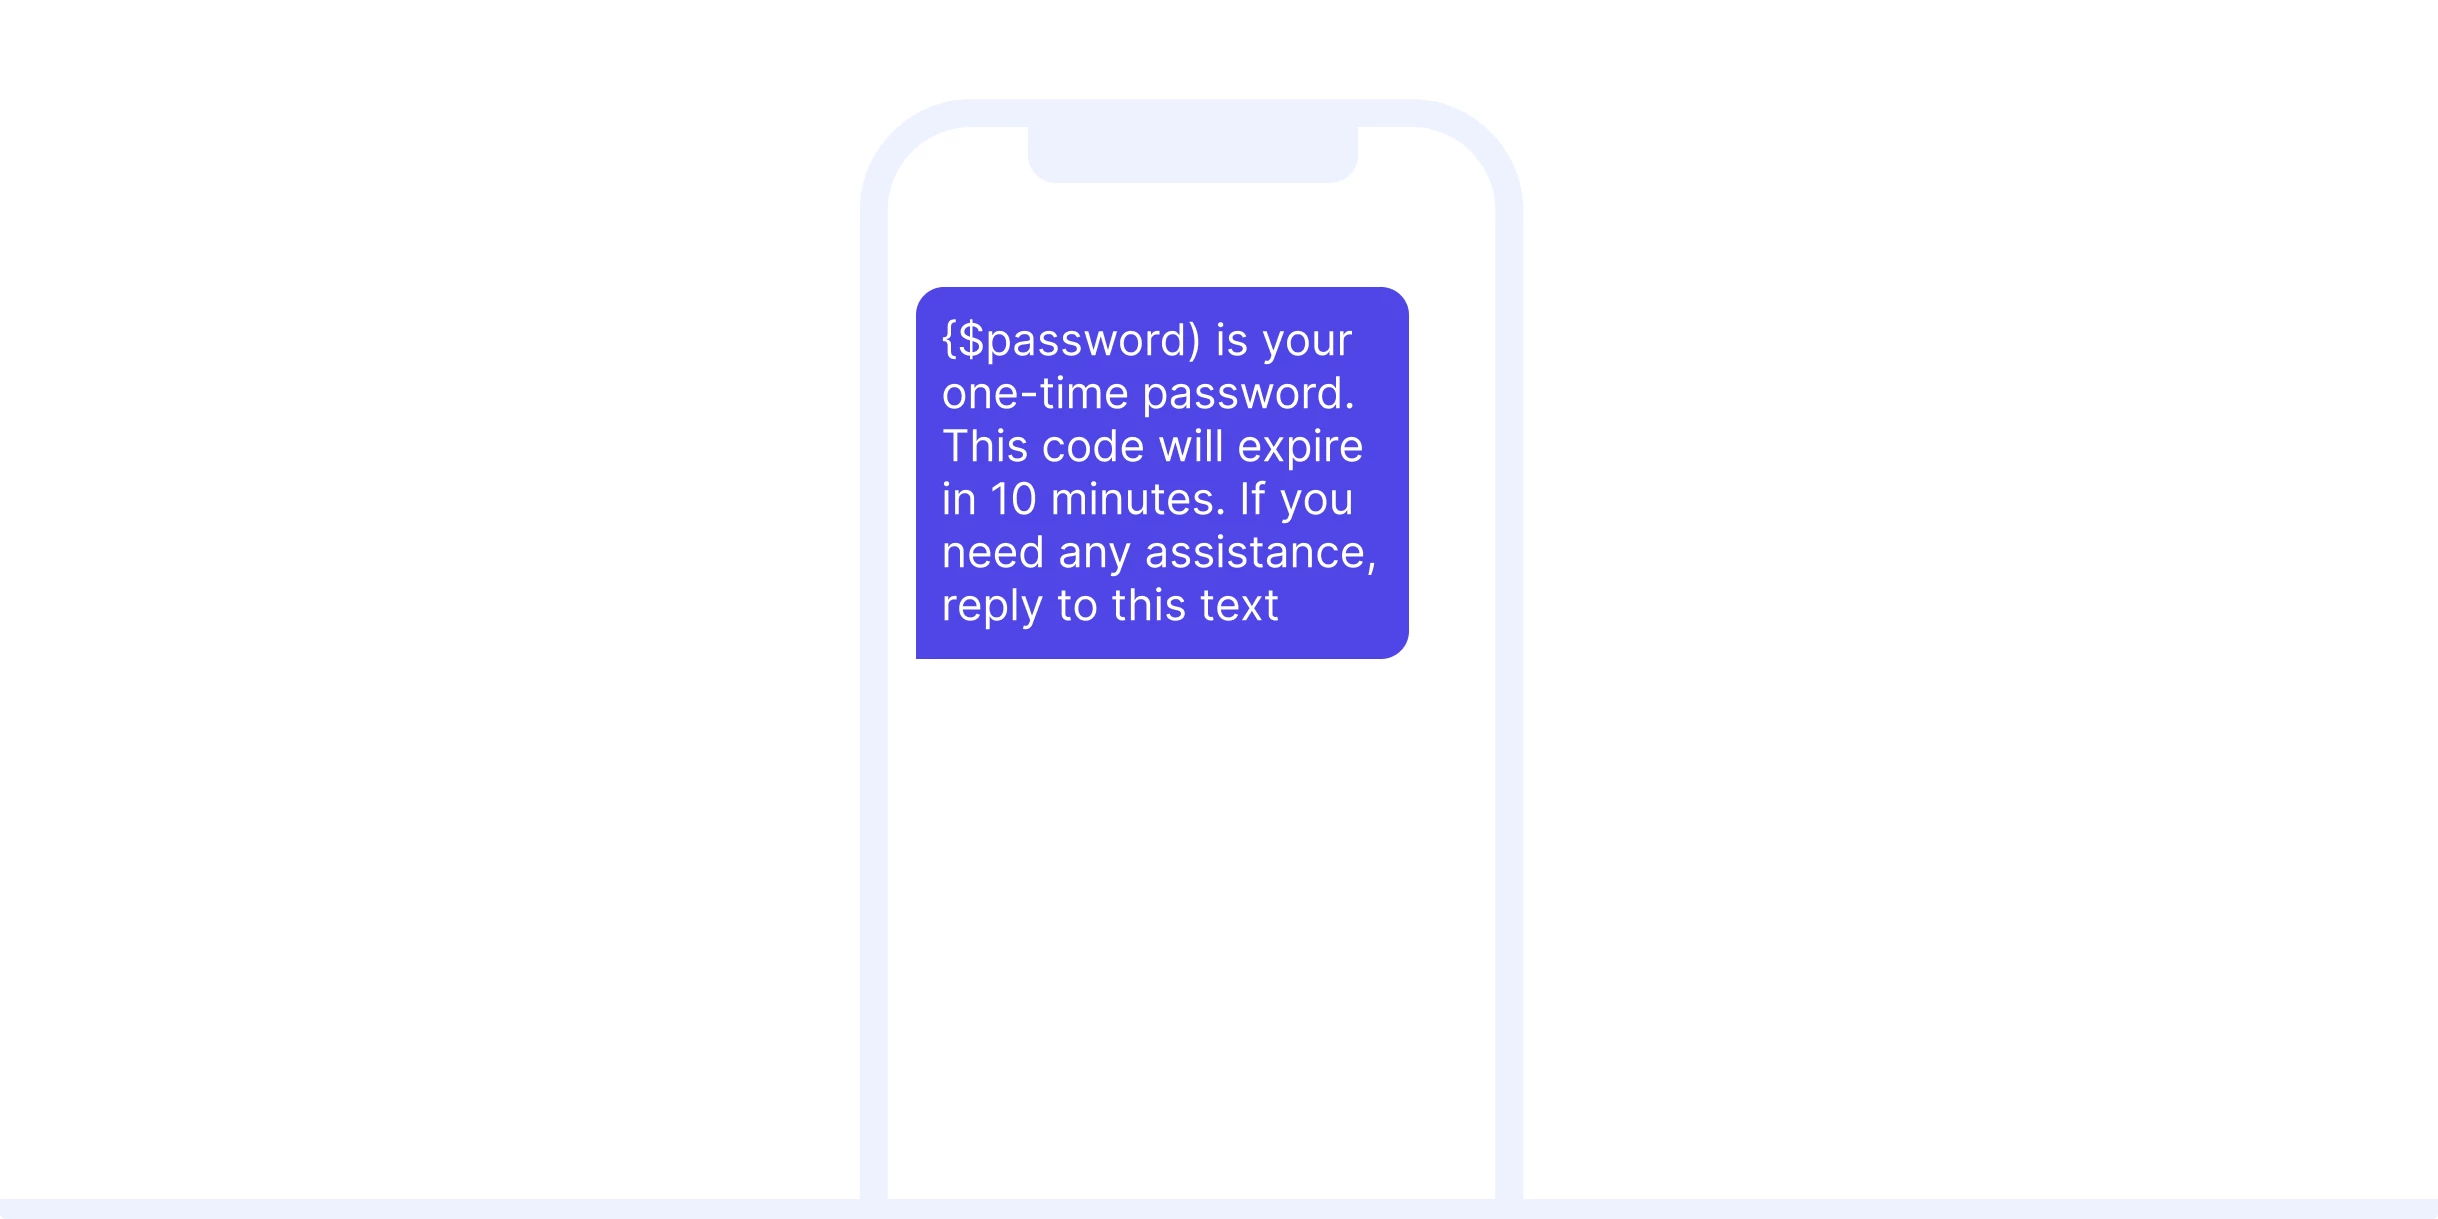 One time password text example.